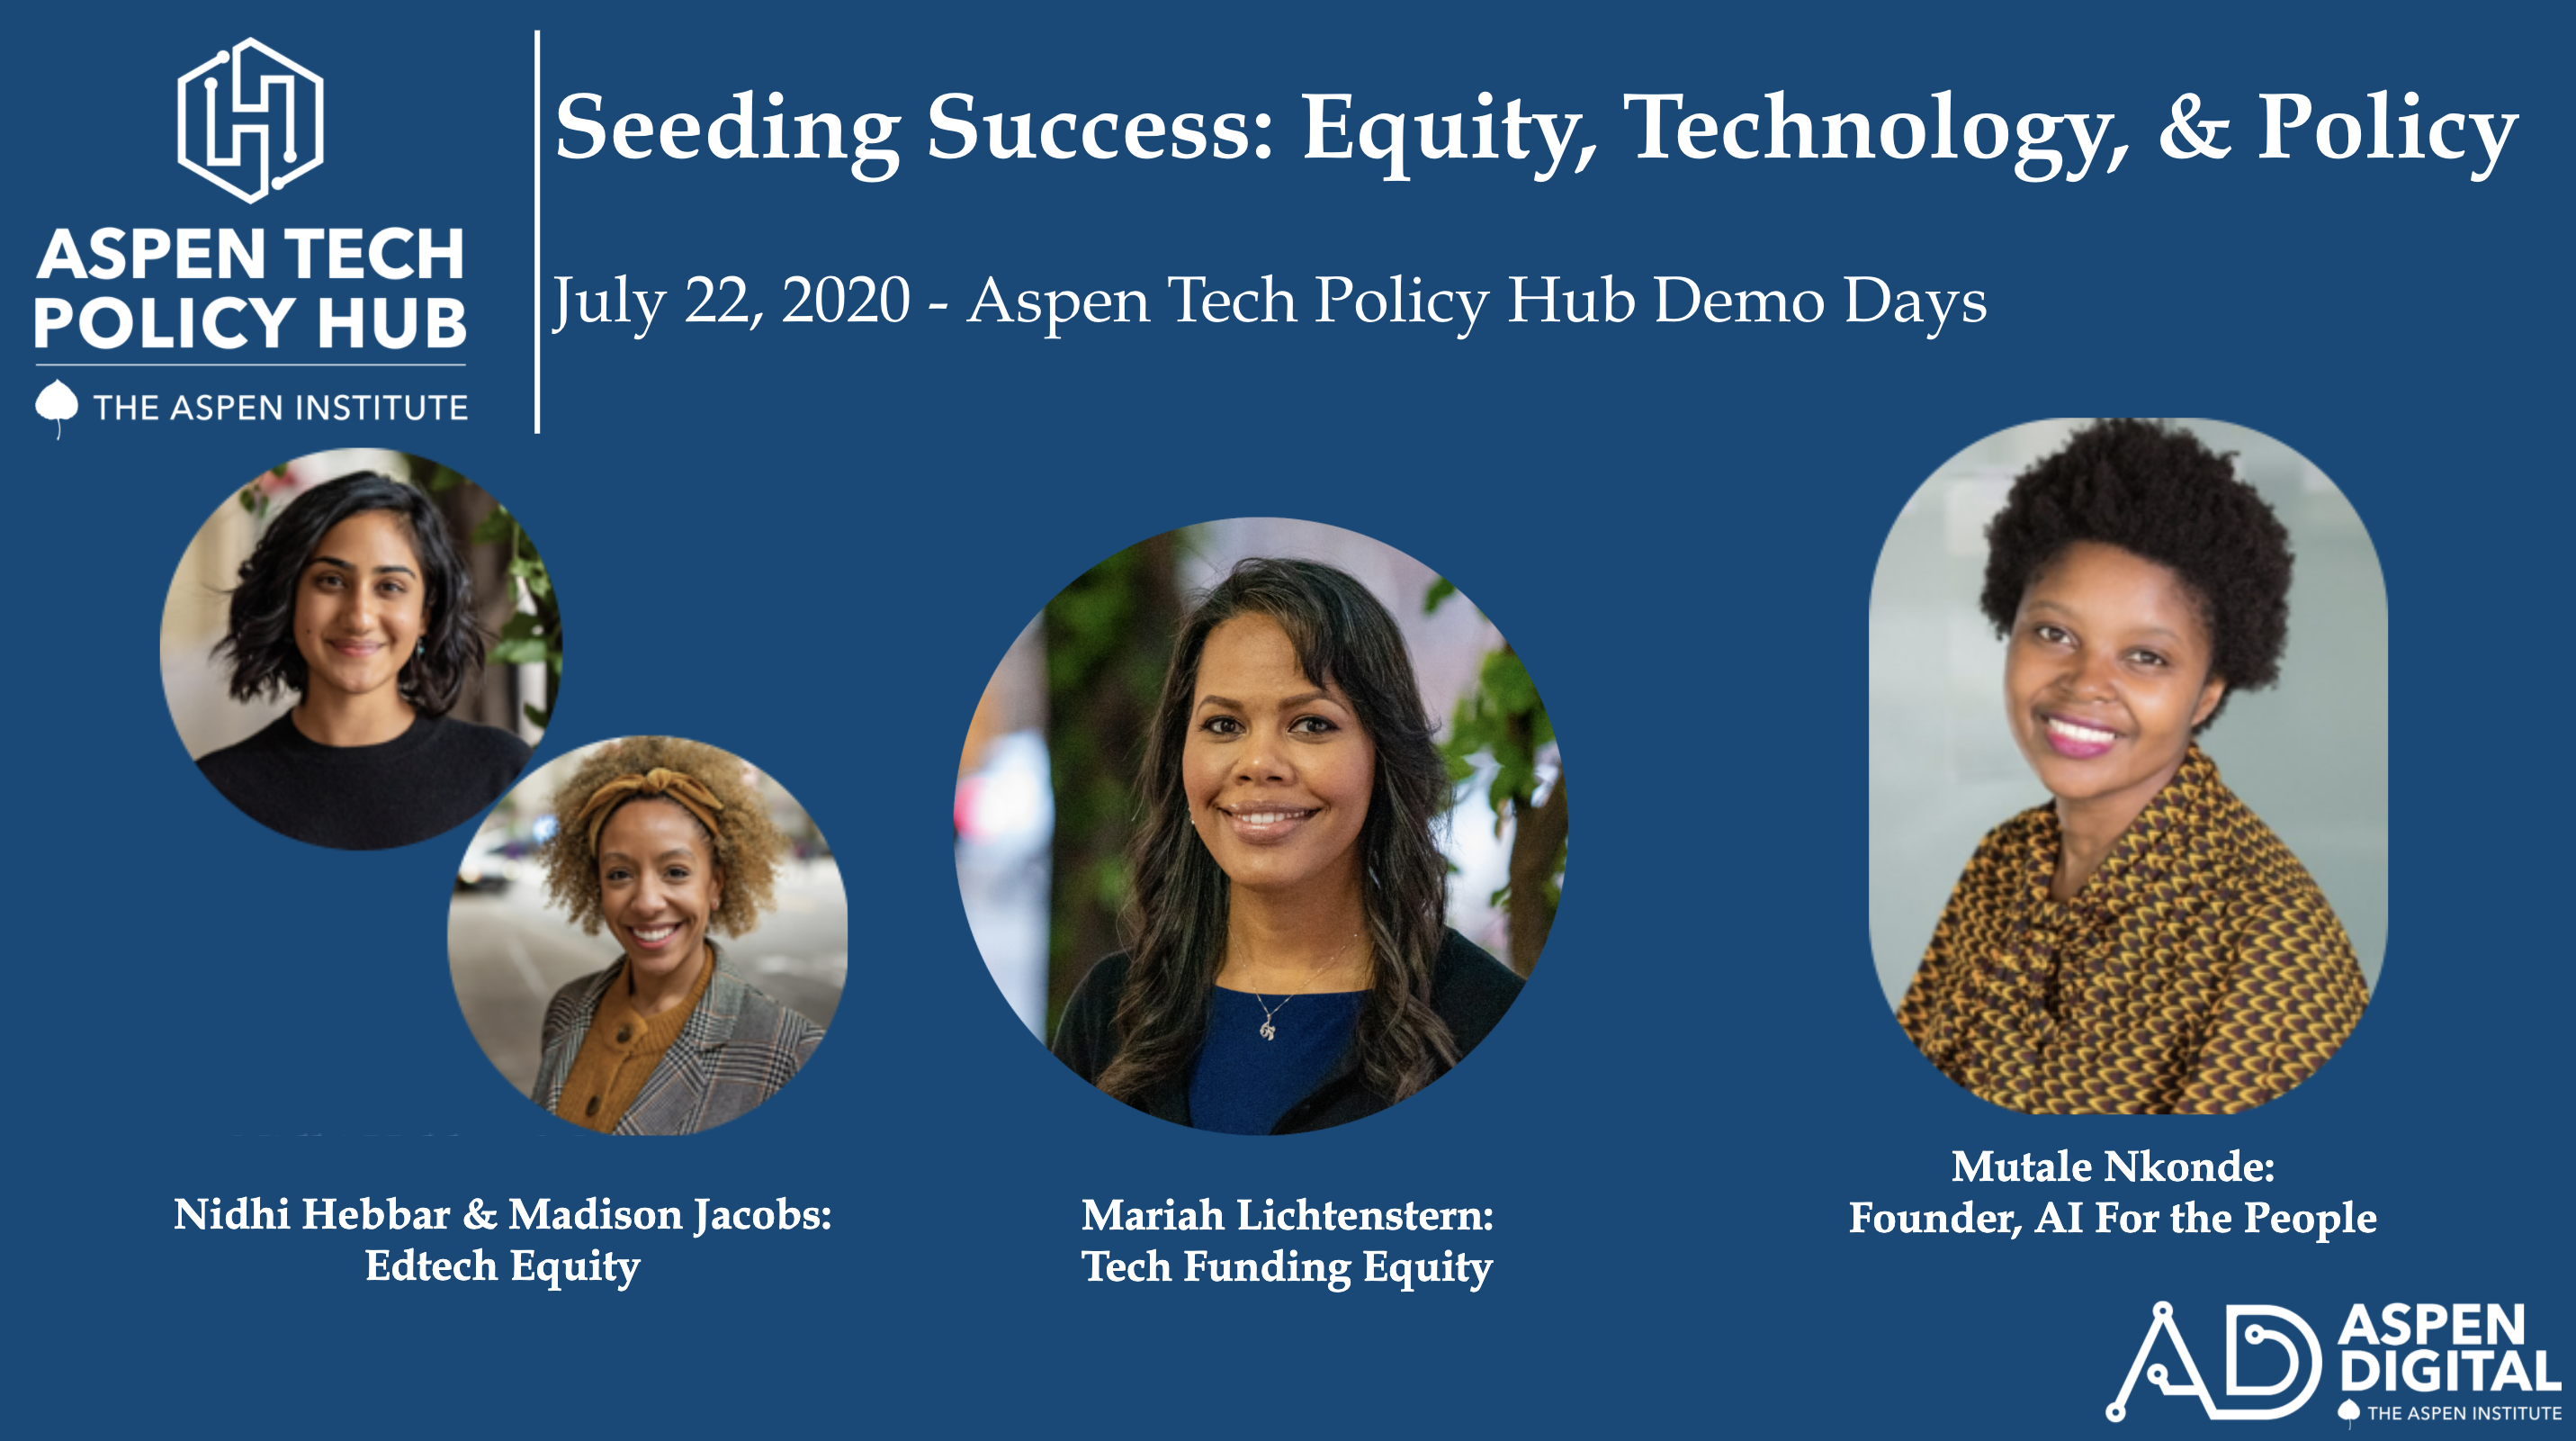 Aspen Tech Policy Hub: Projects on Seeding Success: Equity, Technology & Policy